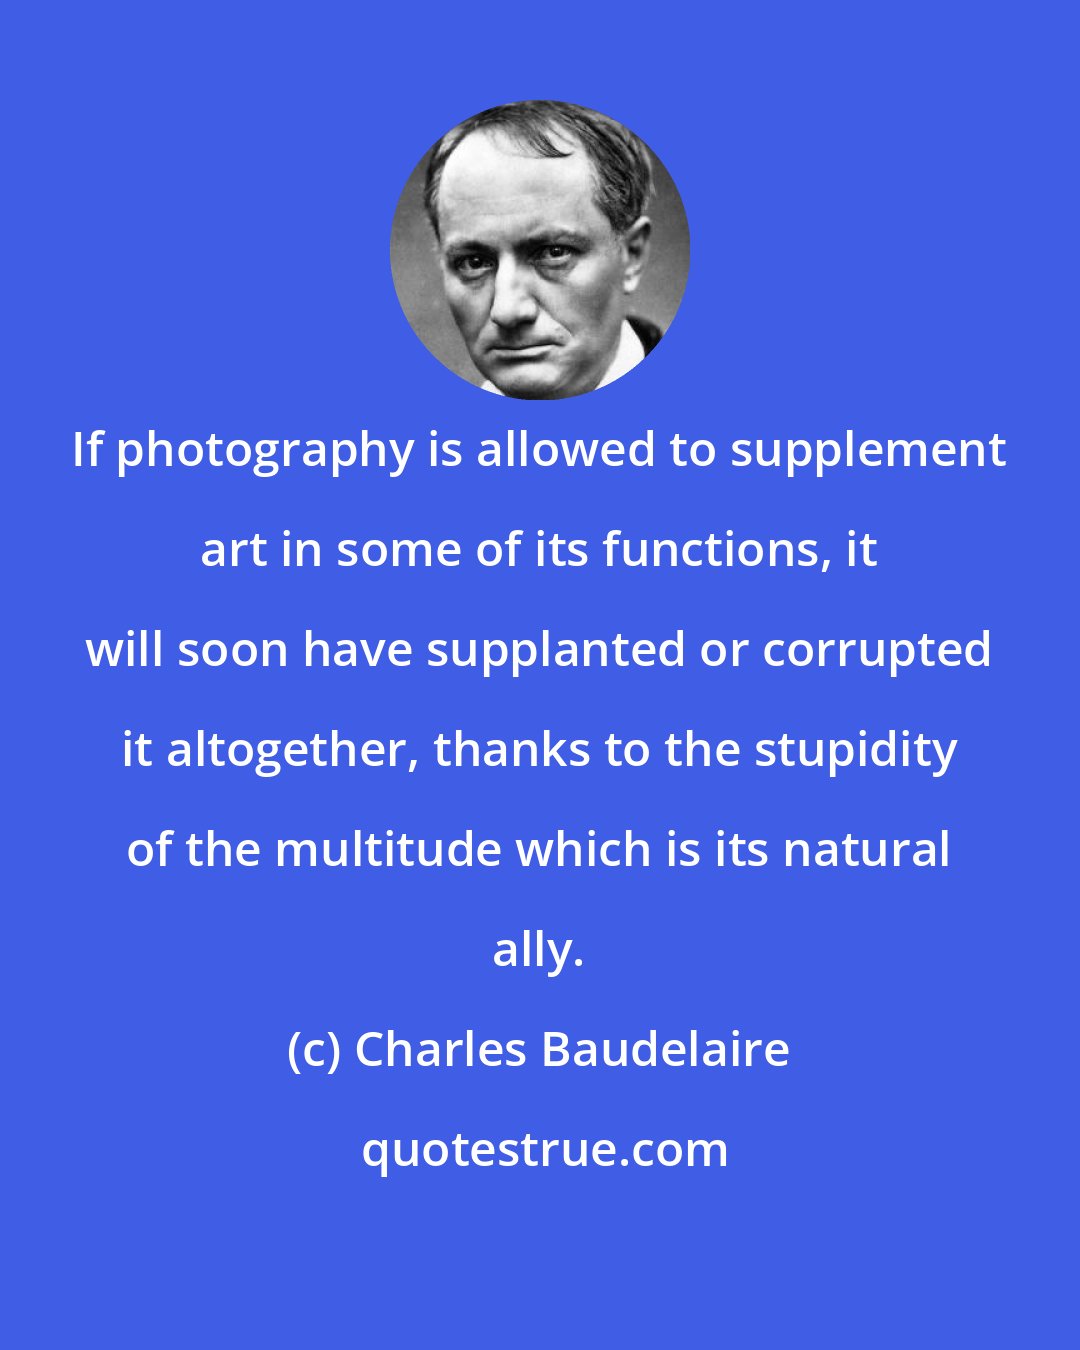 Charles Baudelaire: If photography is allowed to supplement art in some of its functions, it will soon have supplanted or corrupted it altogether, thanks to the stupidity of the multitude which is its natural ally.